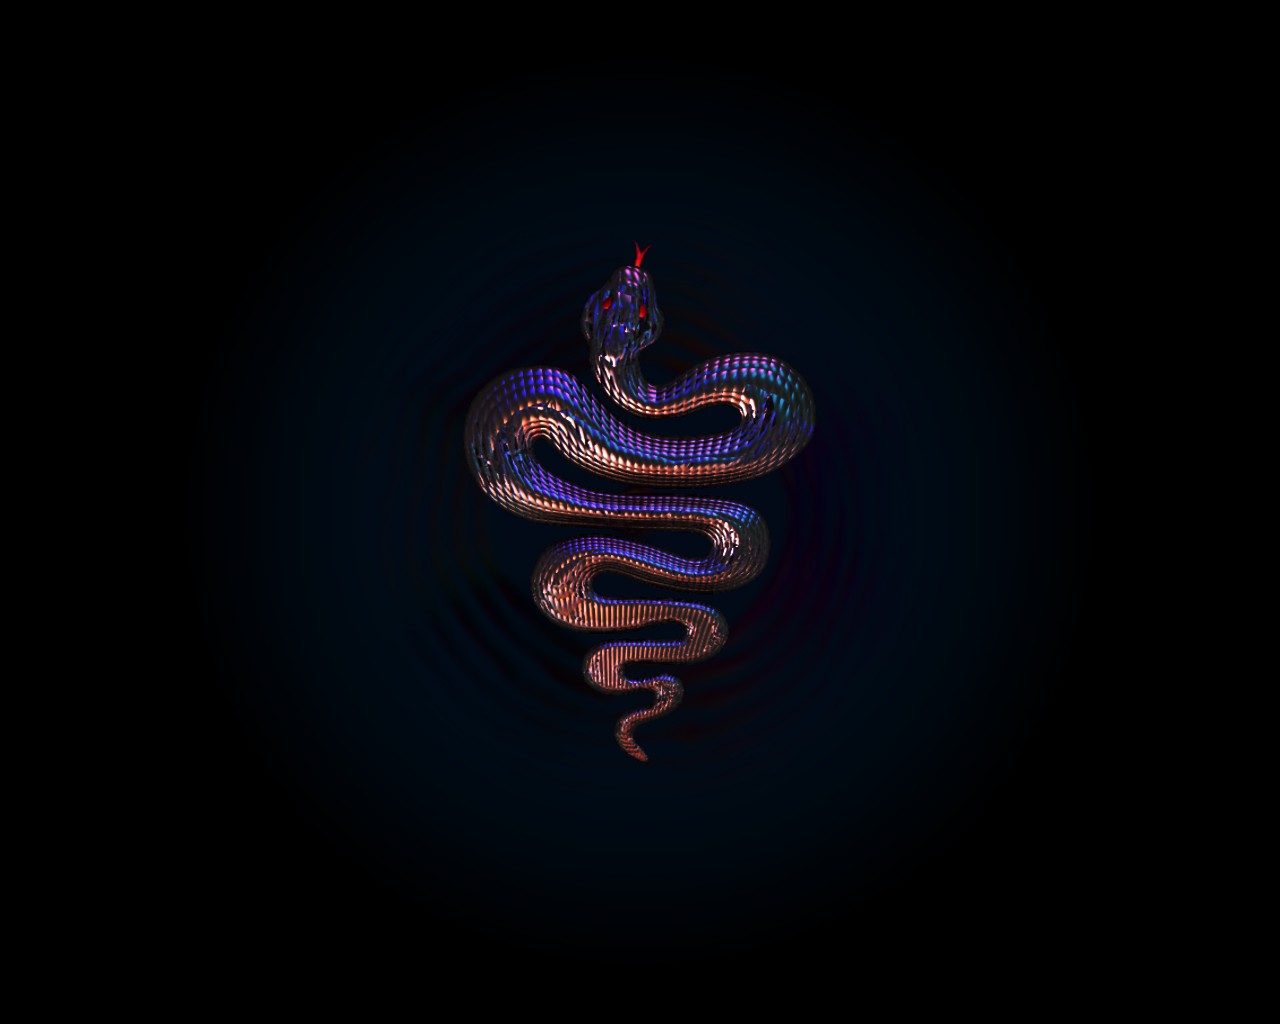 download 3d snake wallpaper which is under the snake wallpapers